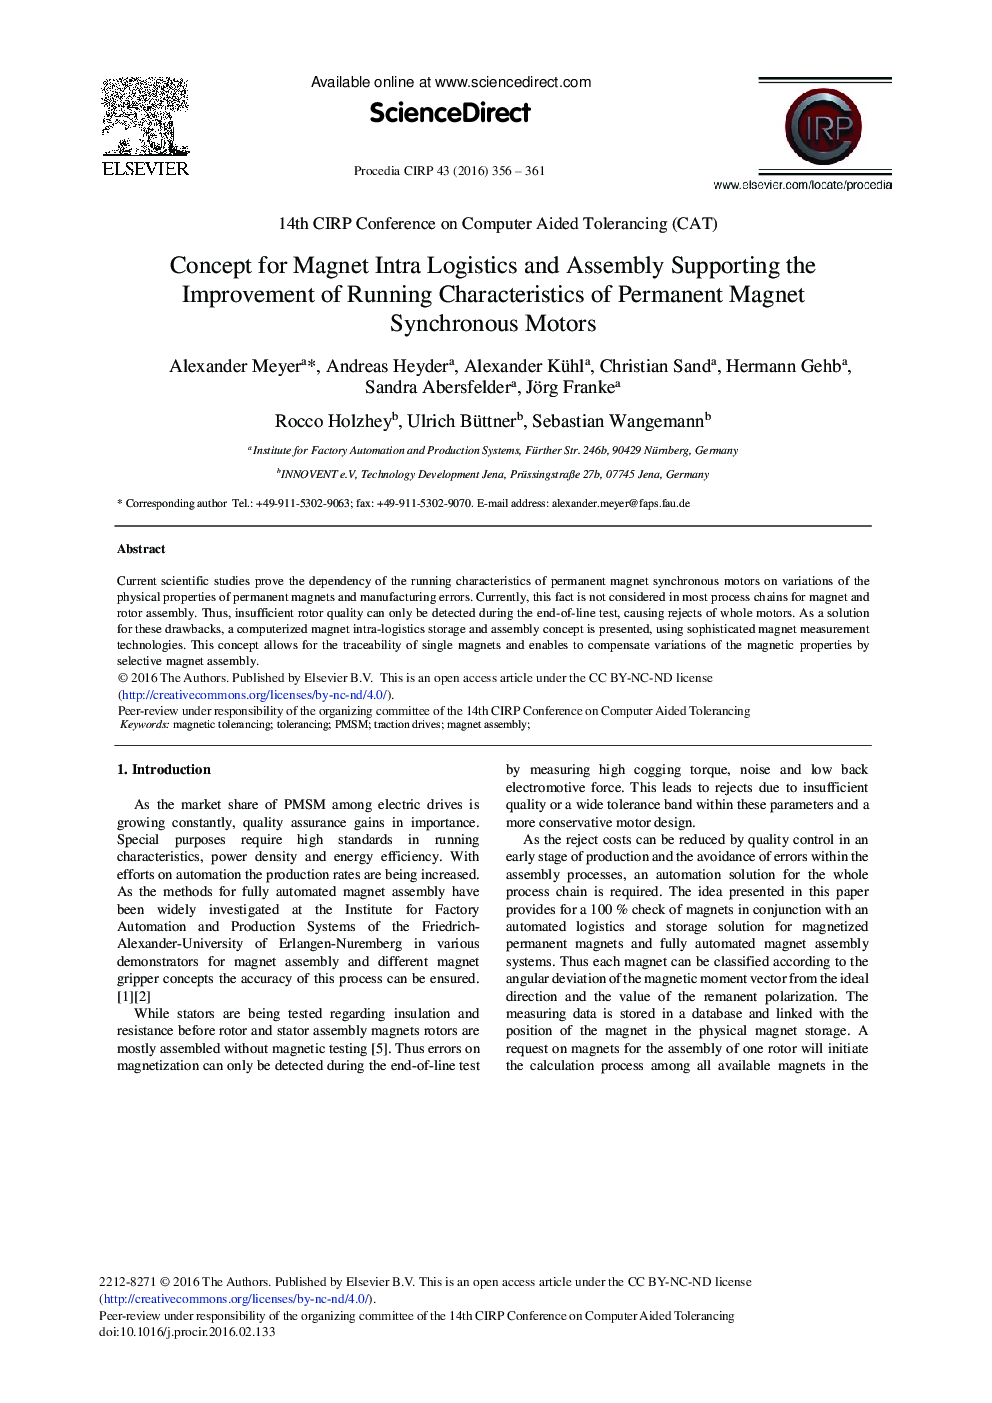 Concept for Magnet Intra Logistics and Assembly Supporting the Improvement of Running Characteristics of Permanent Magnet Synchronous Motors 